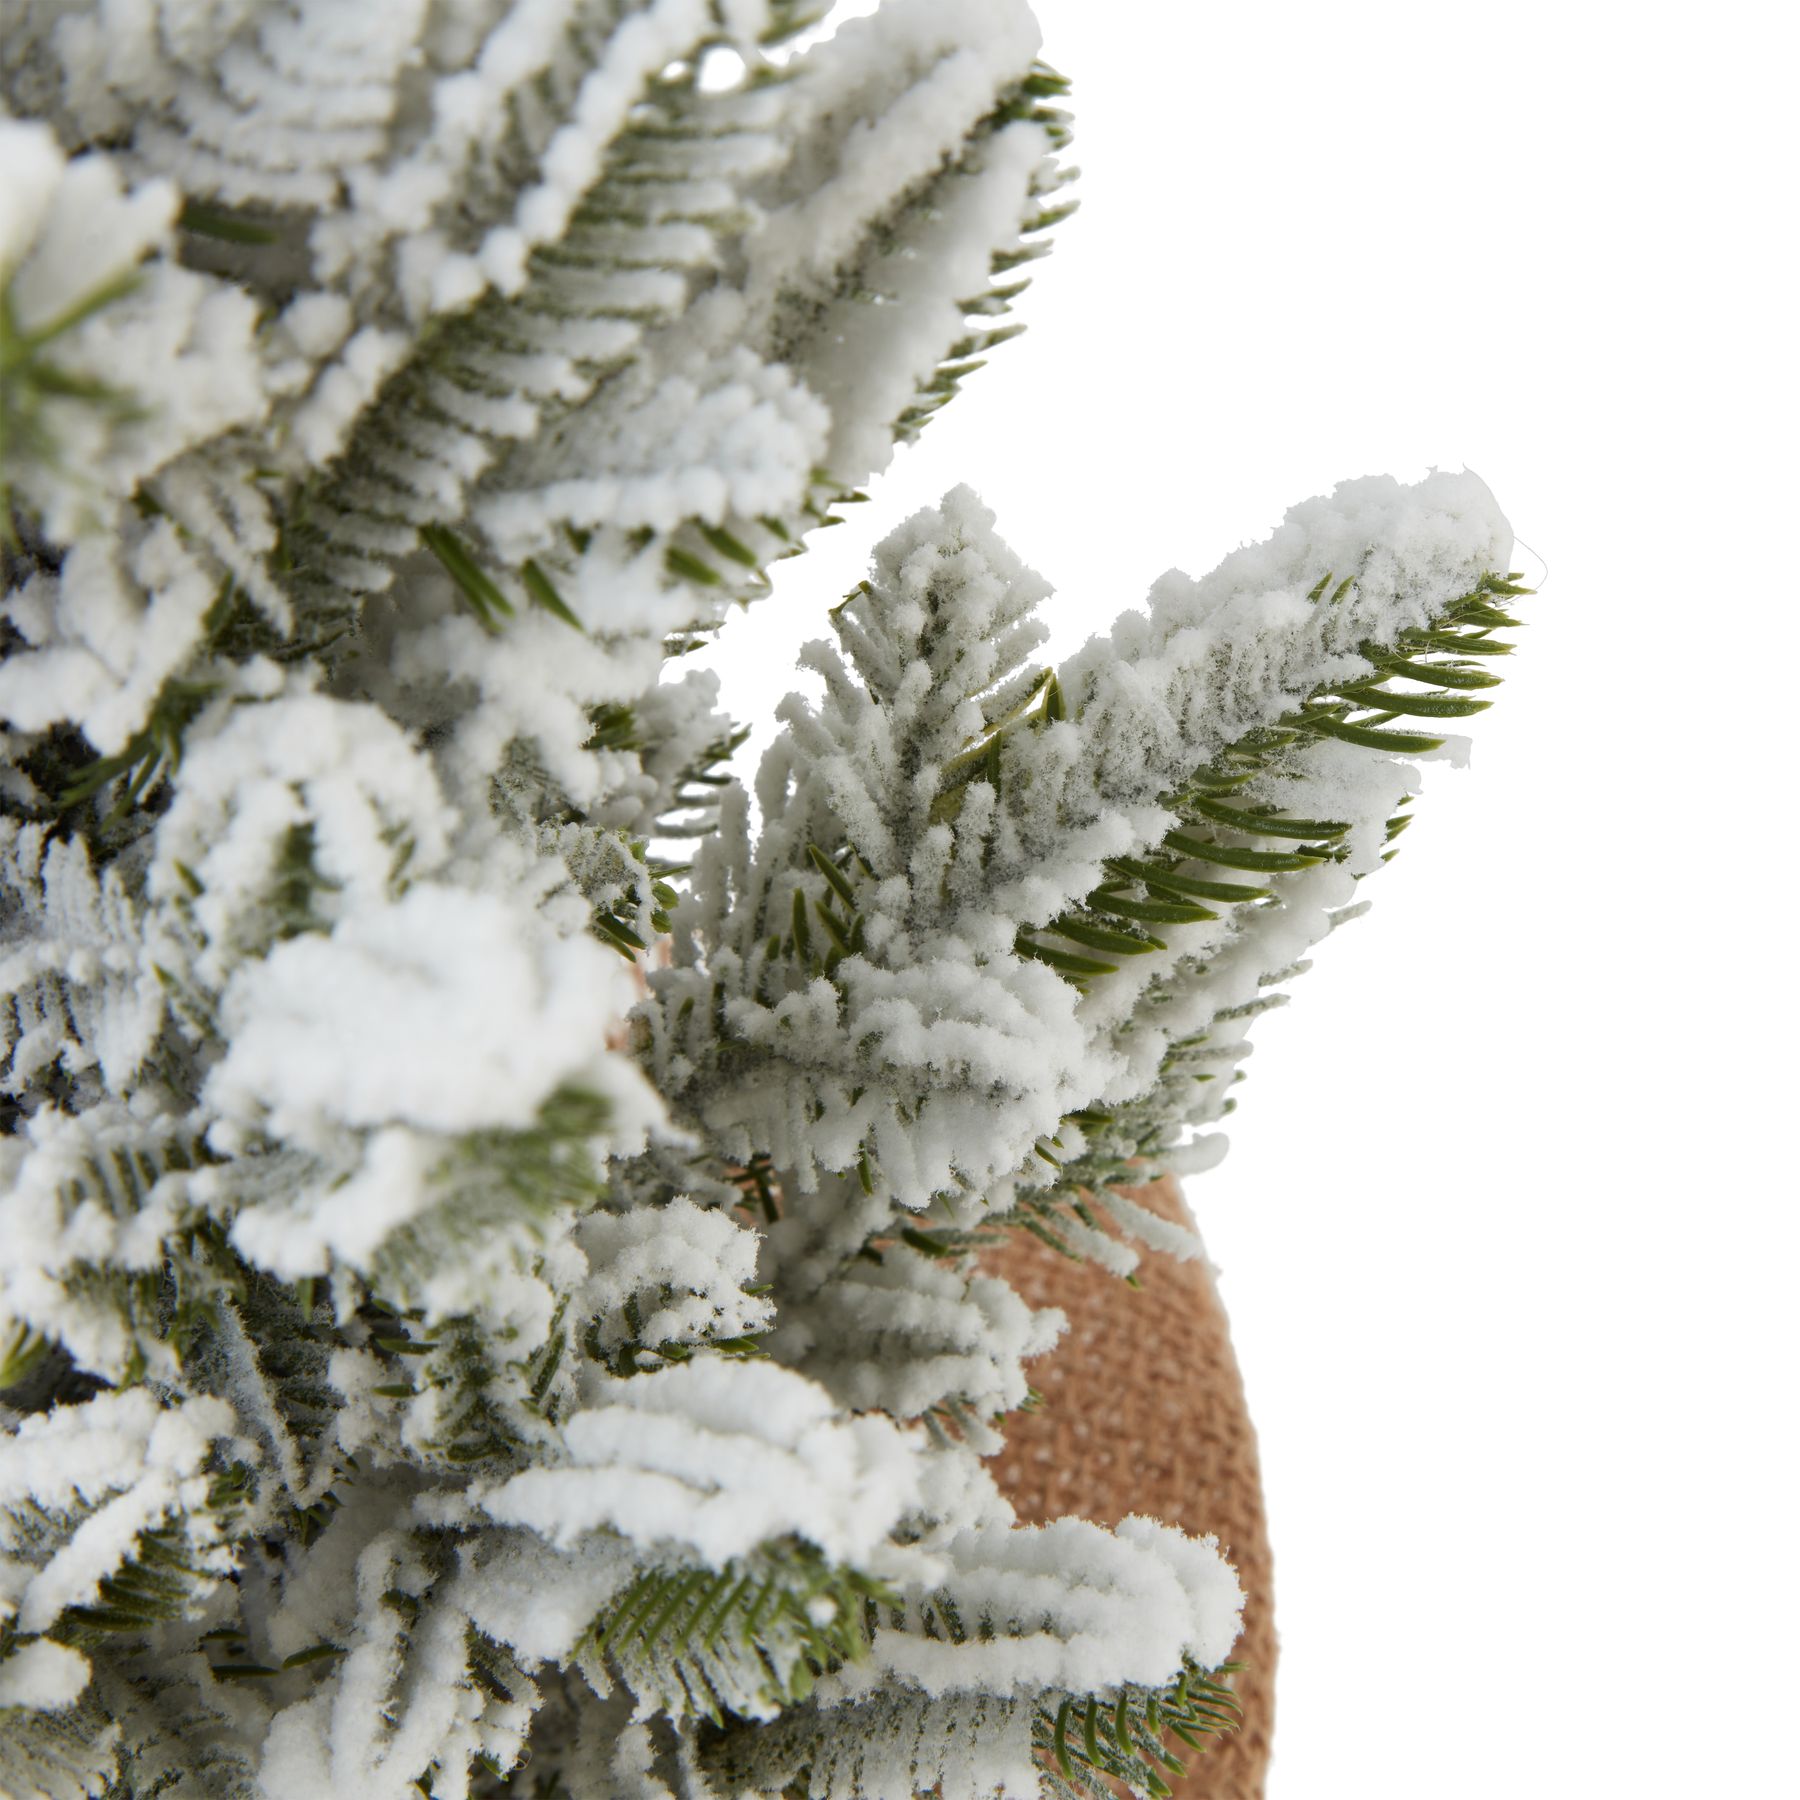 Snowy Potted Christmas Pine Tree with Hessian Base - Image 2